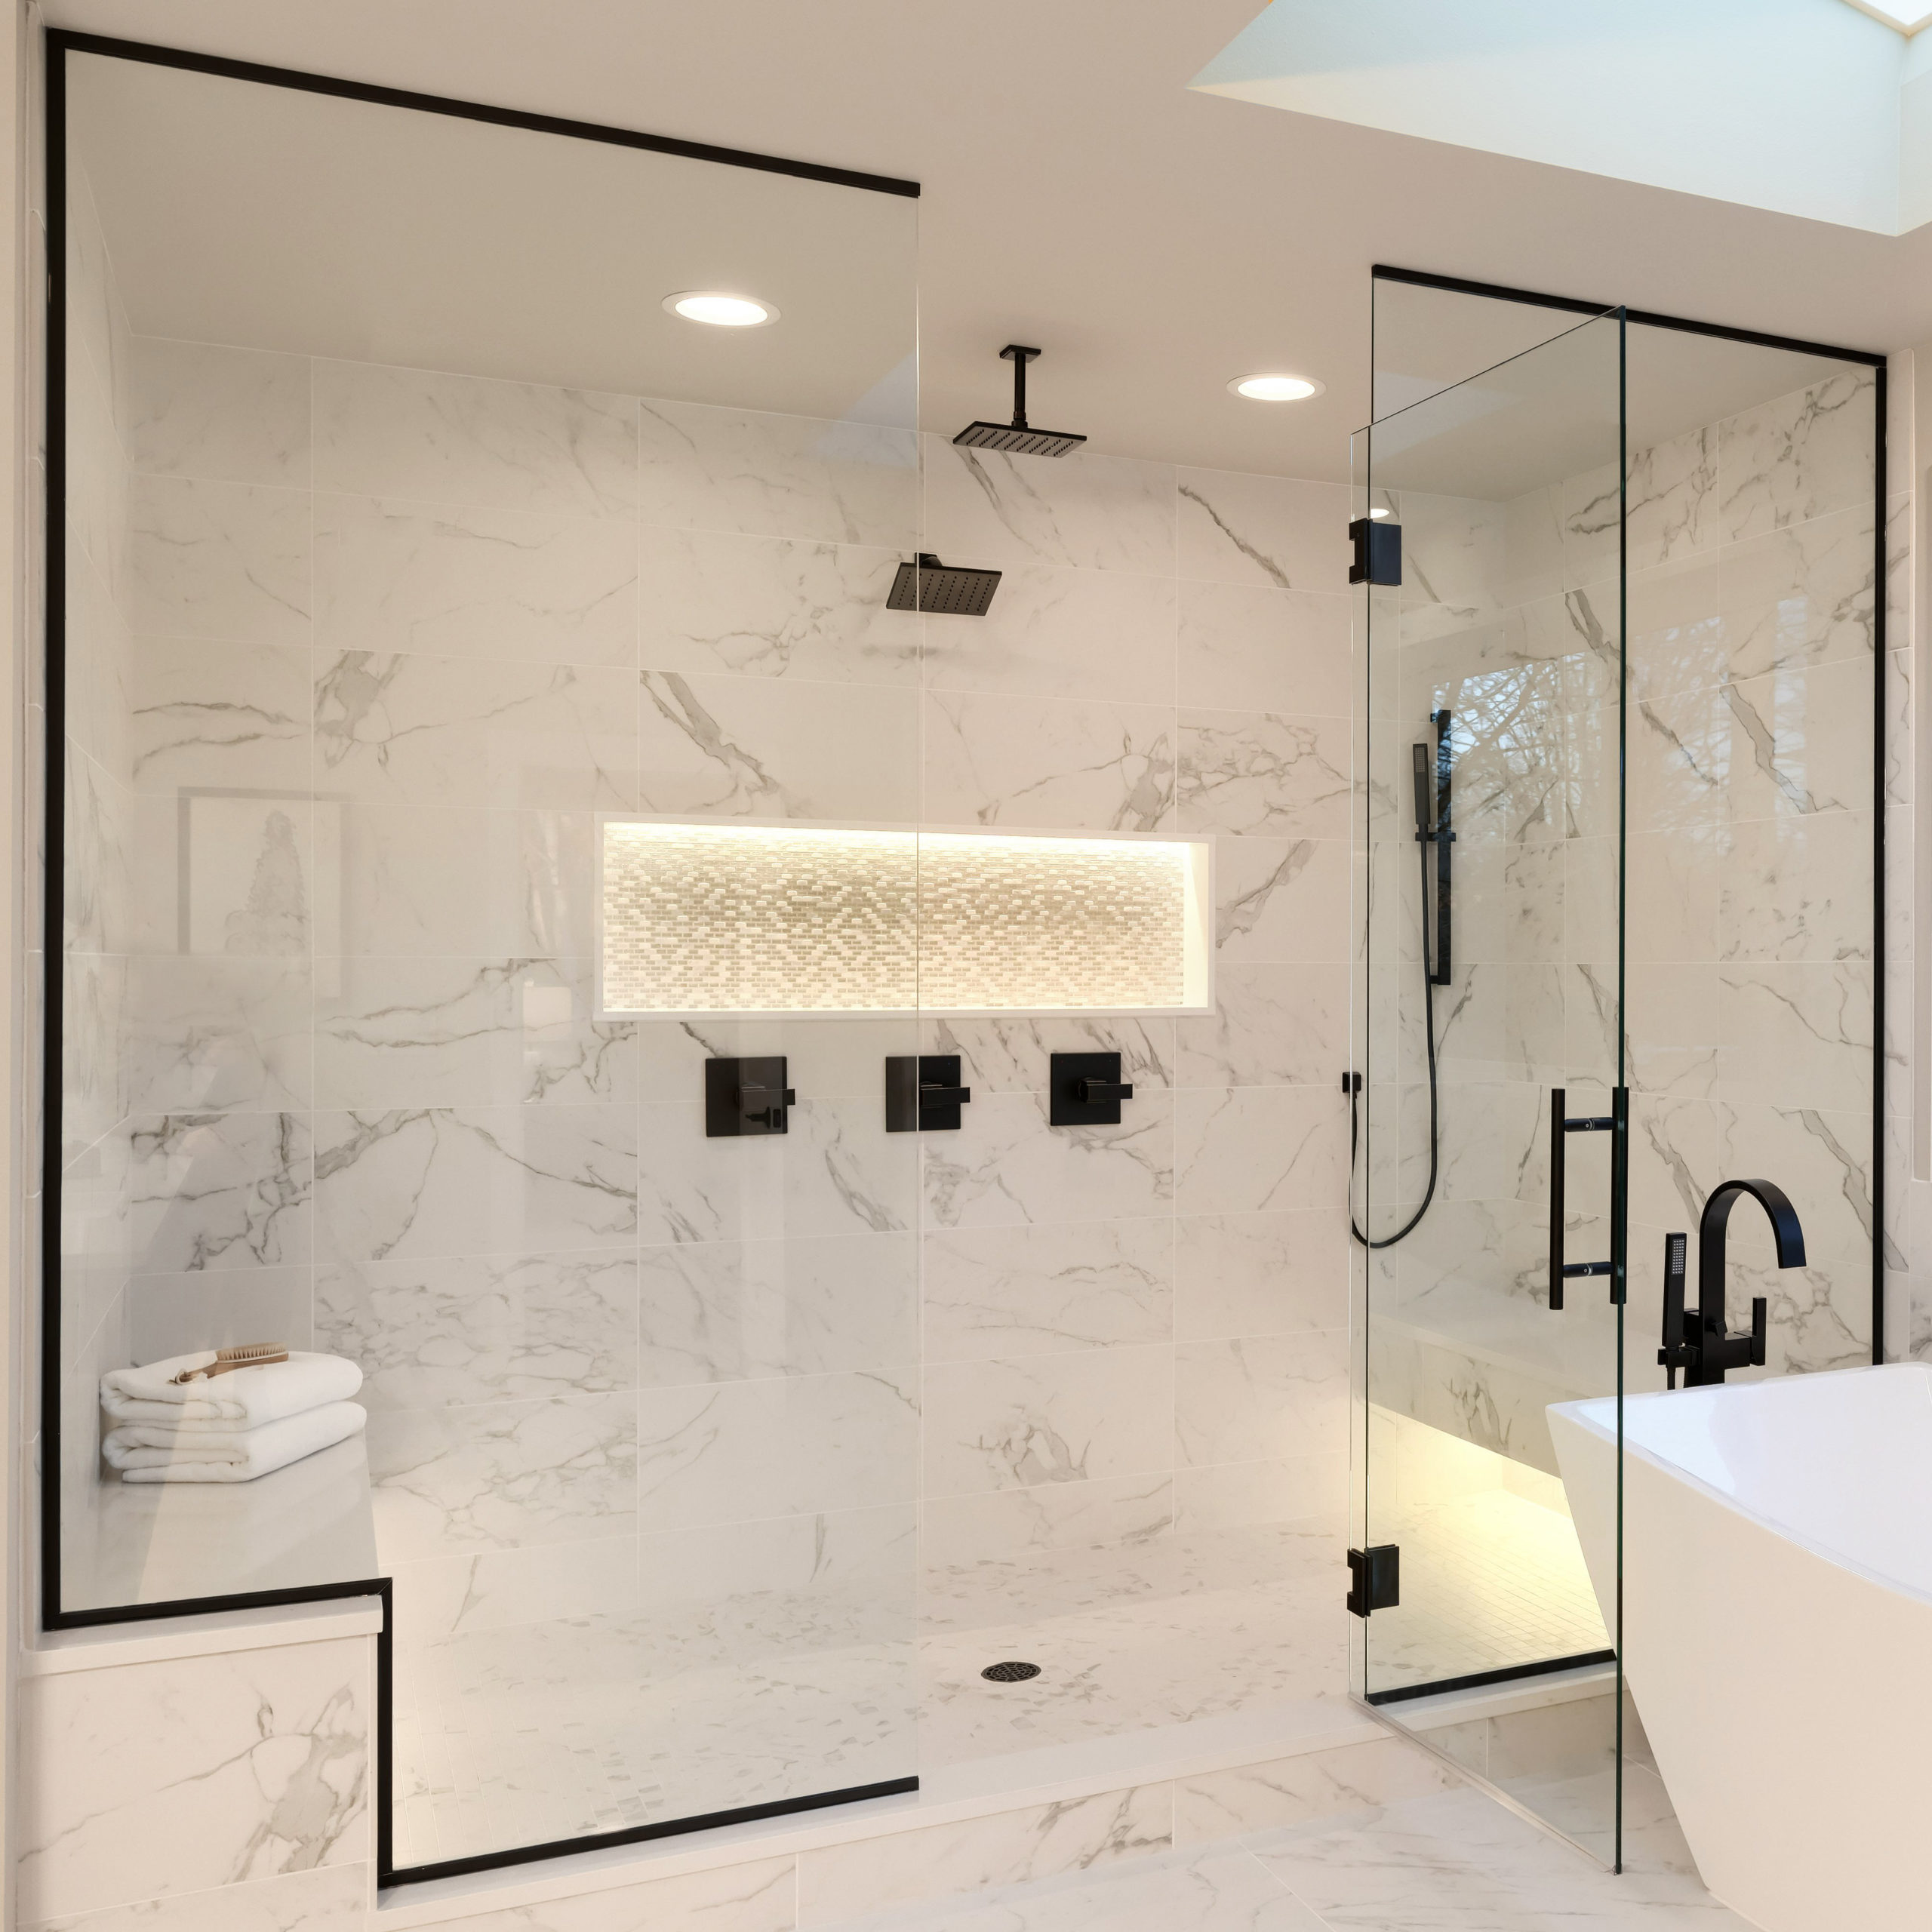 7 Things to Think About When Remodeling a Tub into a Walk-In Shower